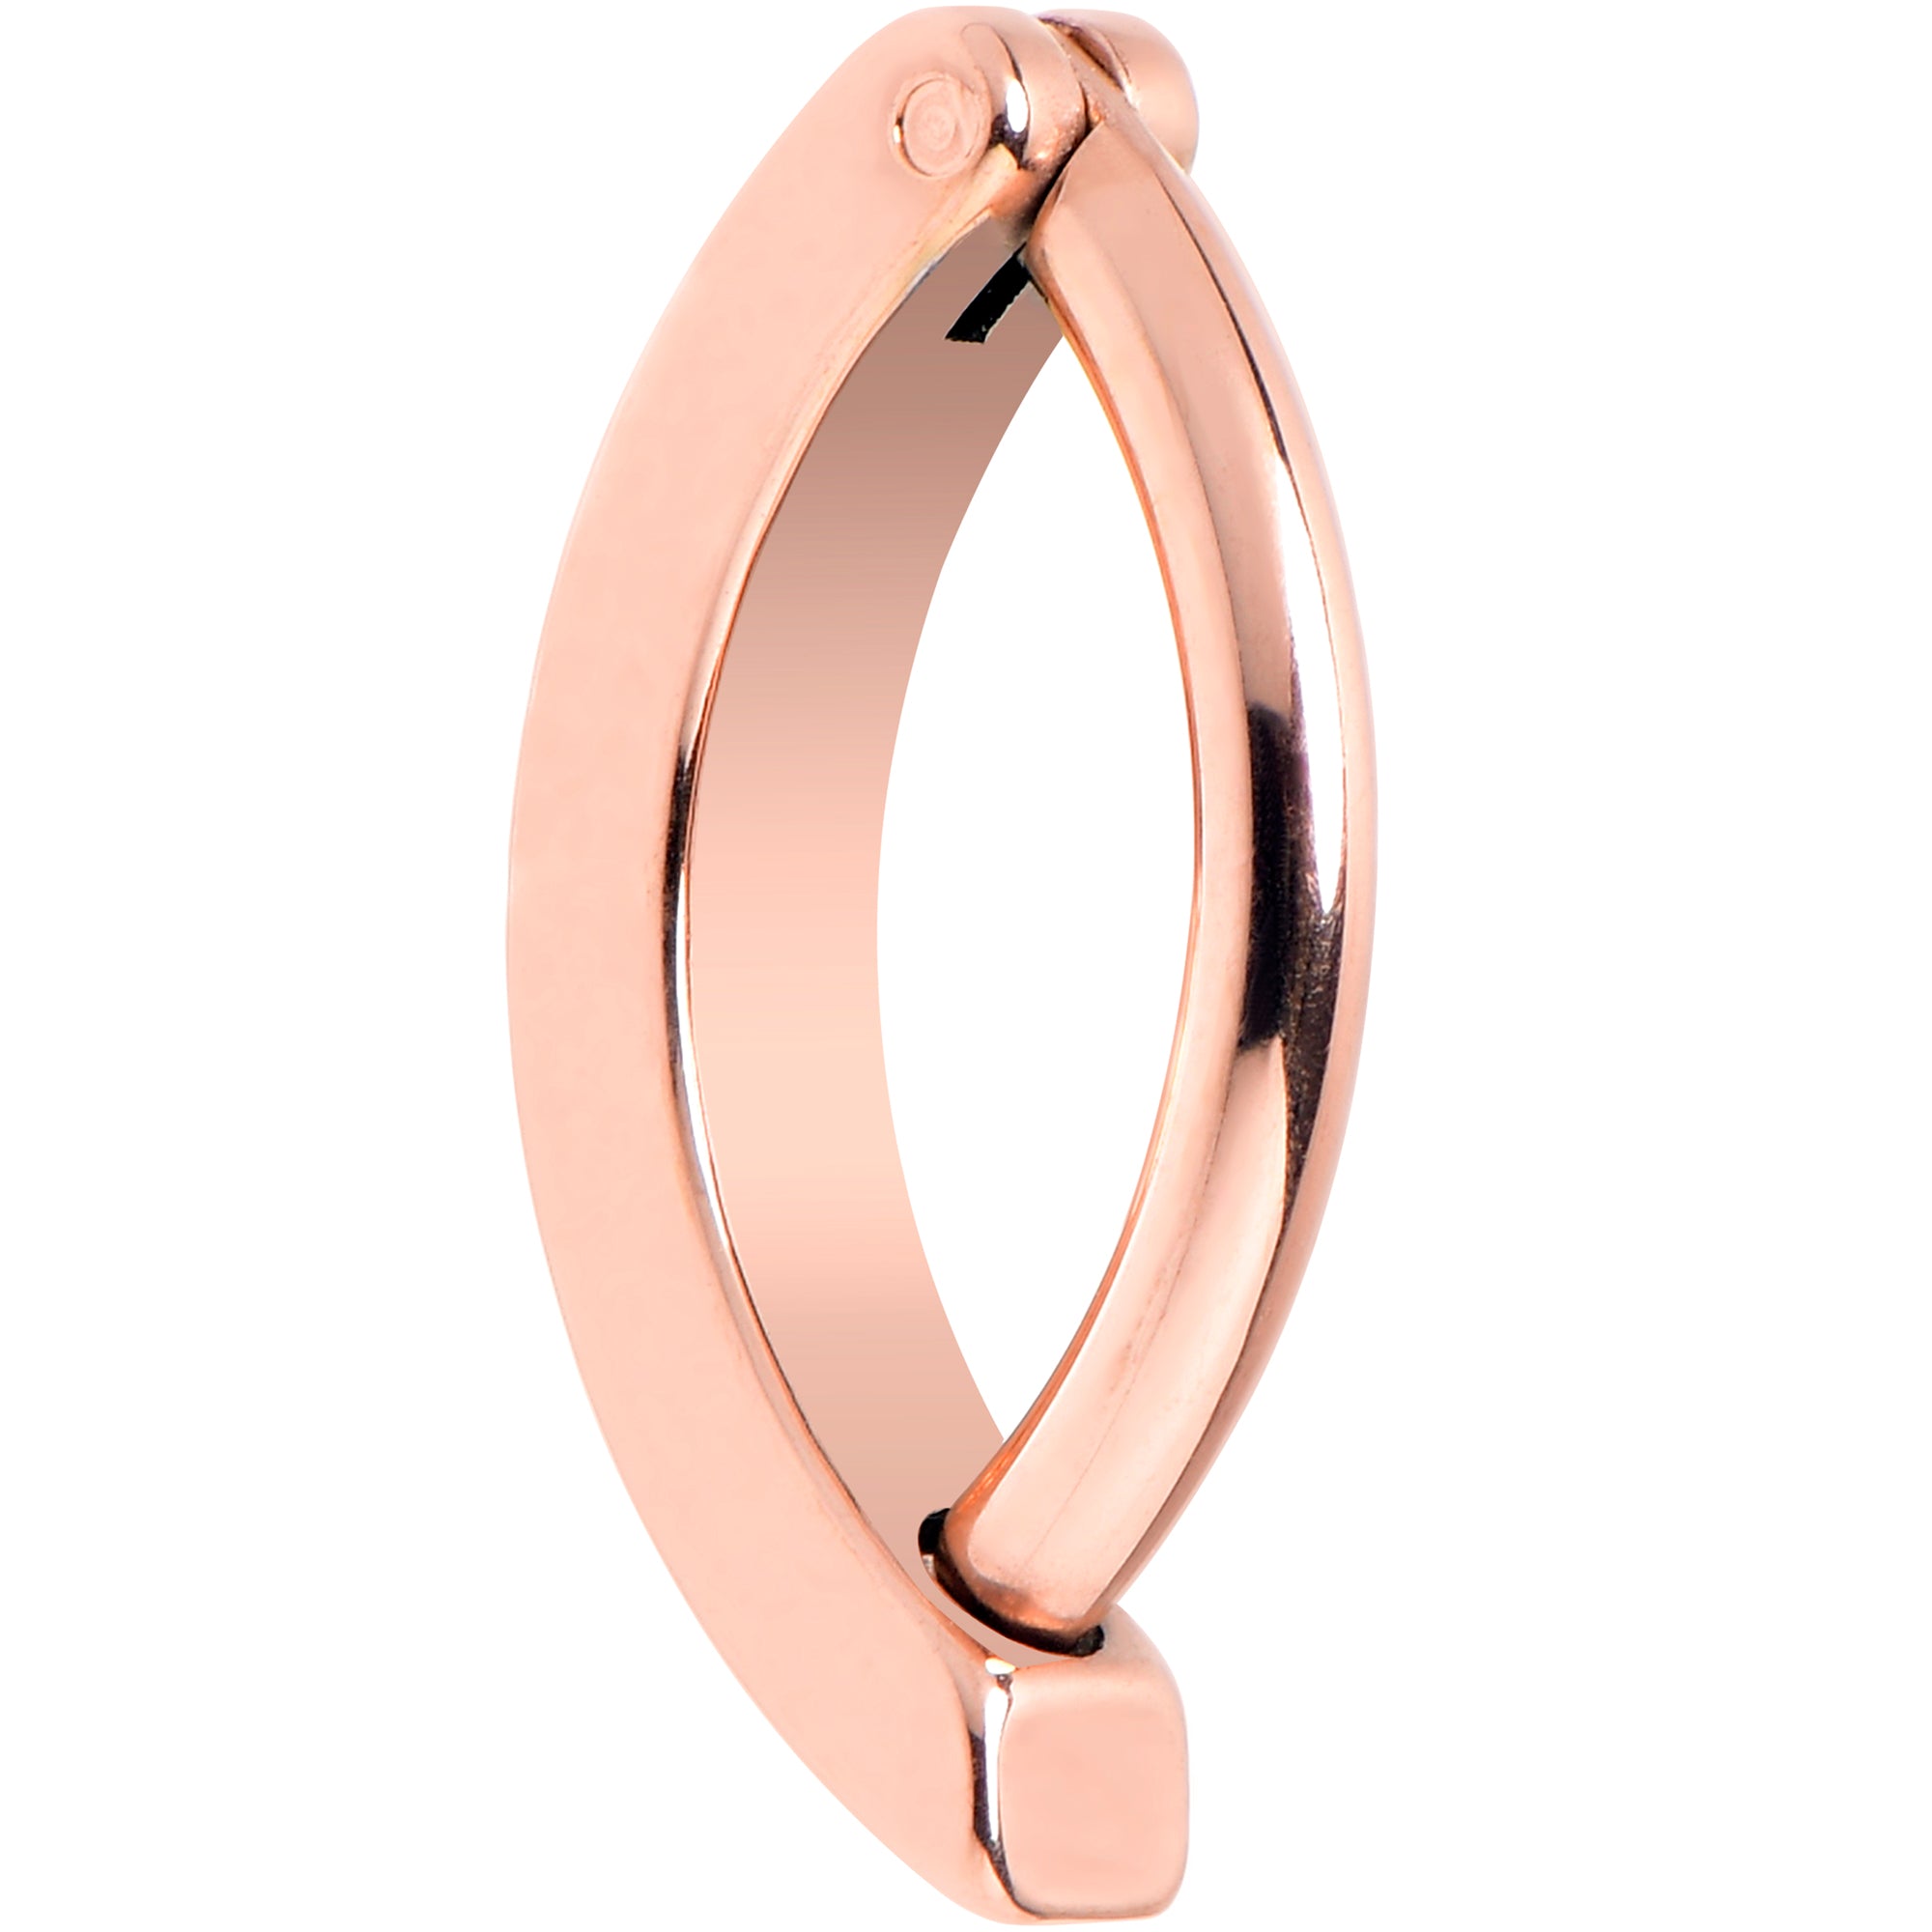 14 Gauge 3/8 Rose Gold Tone 316L Surgical Steel Smooth Style Hinged Hoop Belly Ring